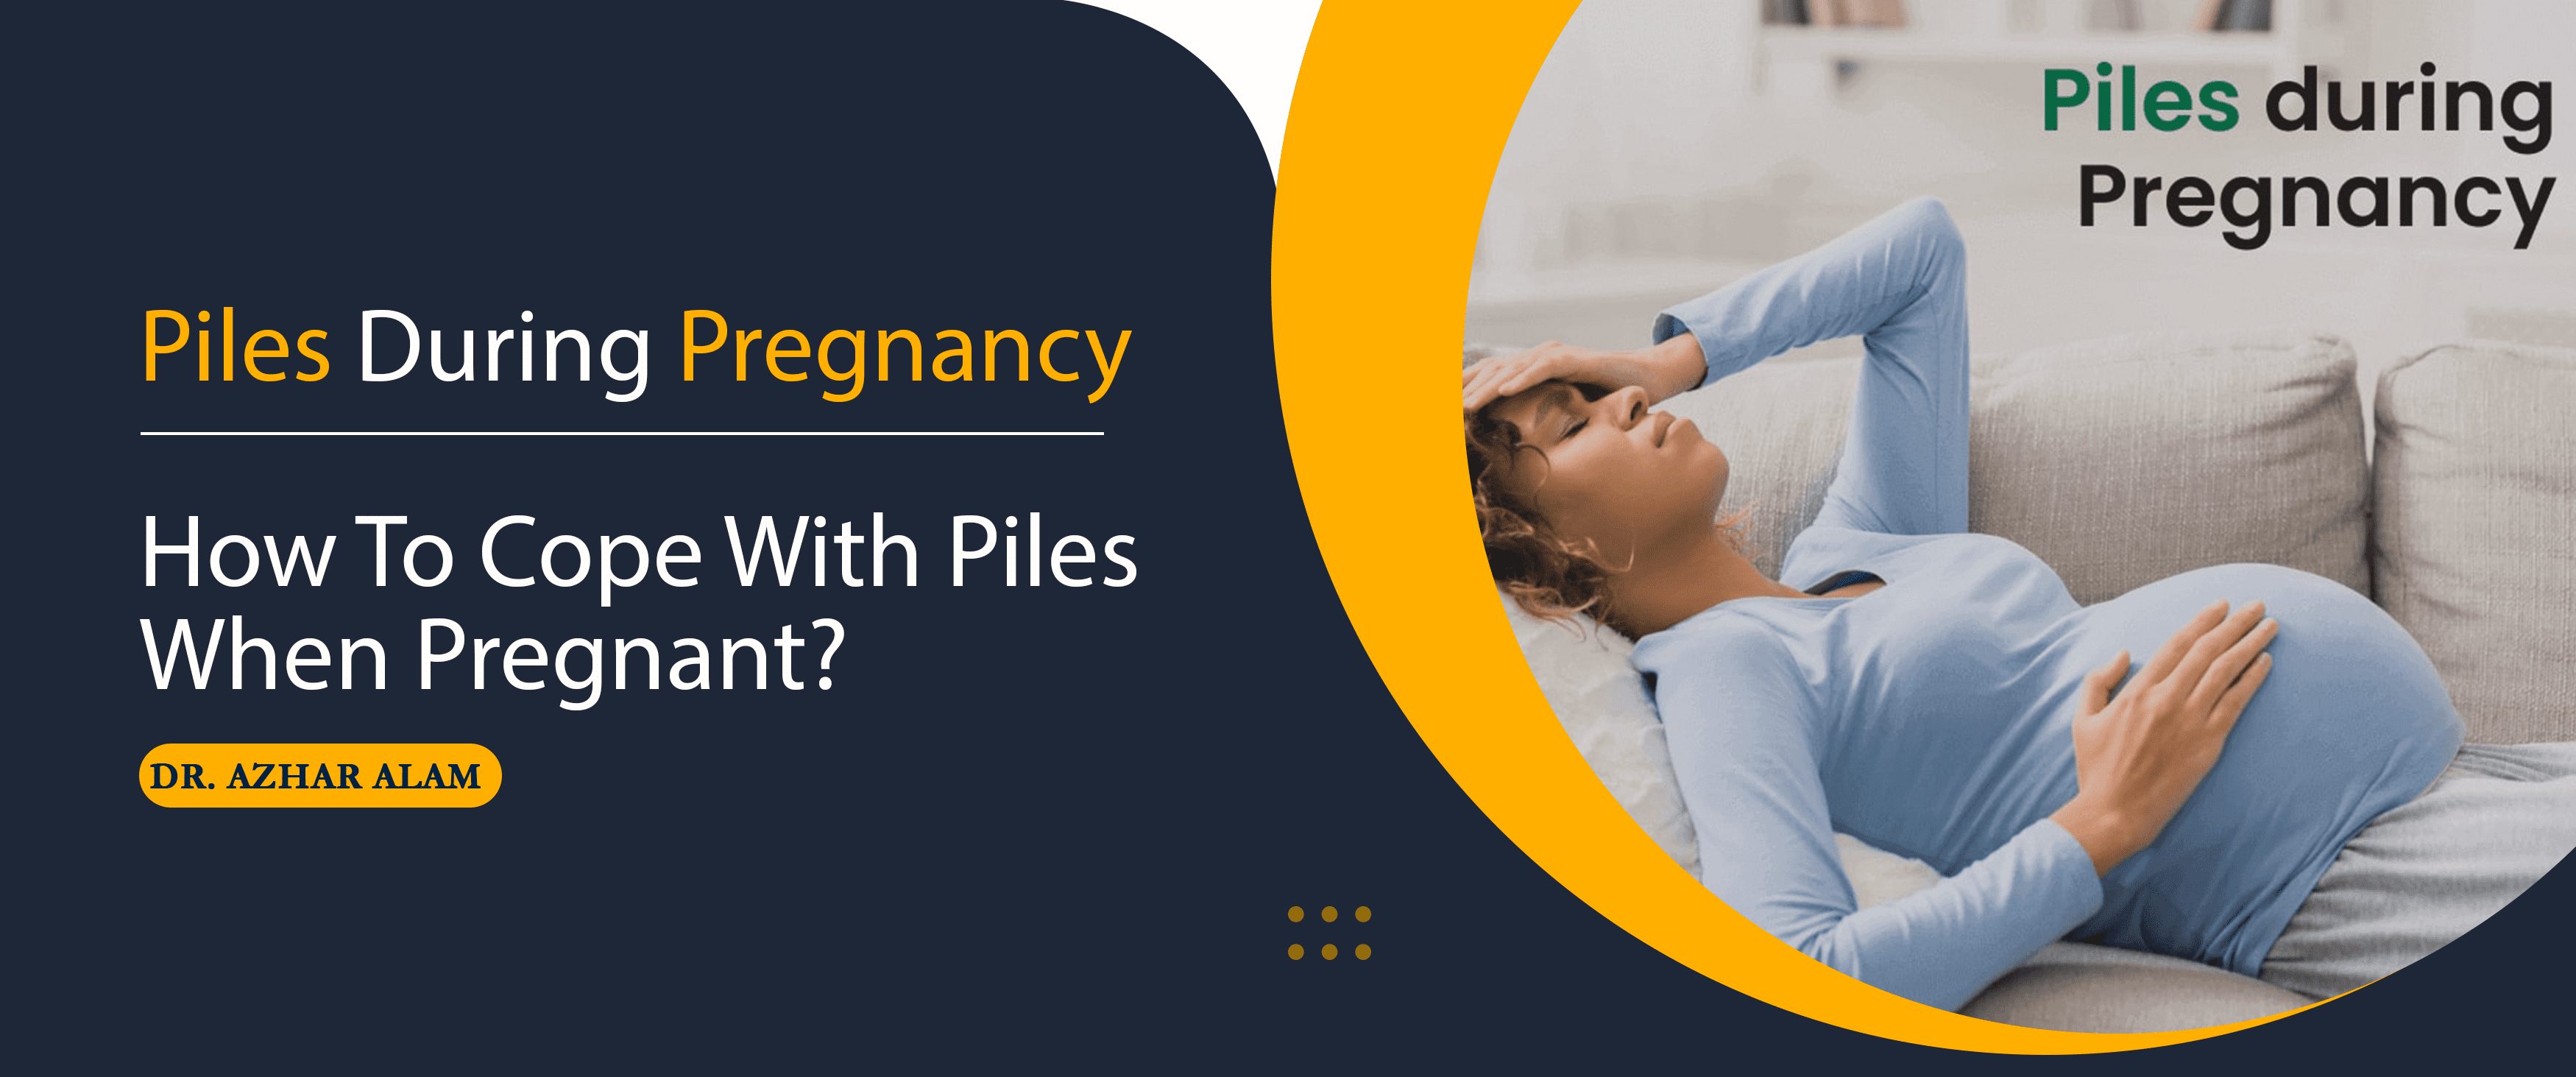 Piles During Pregnancy